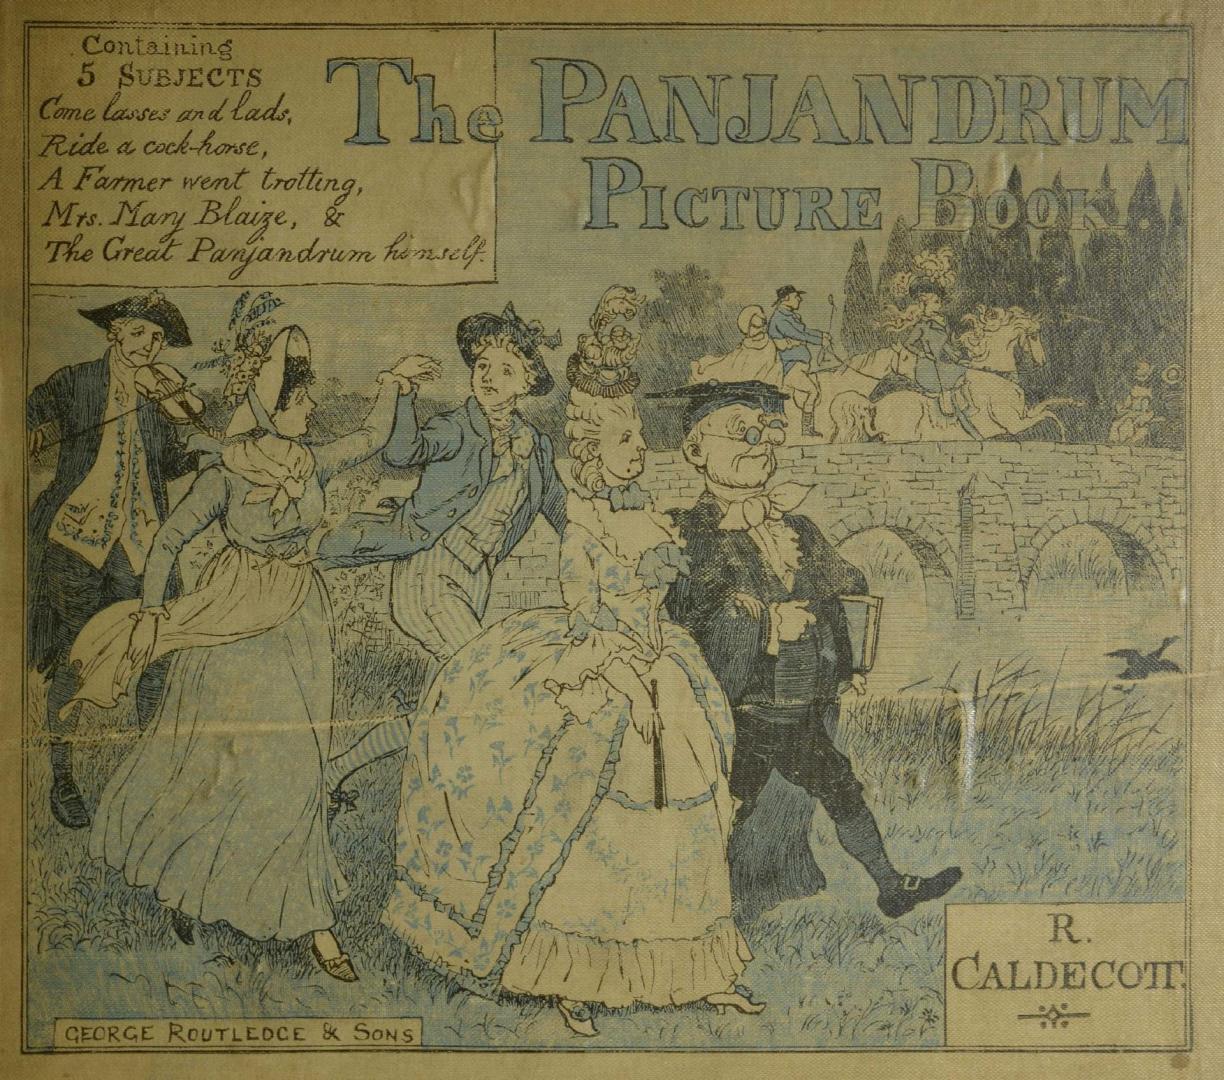 The Panjandrum picture book